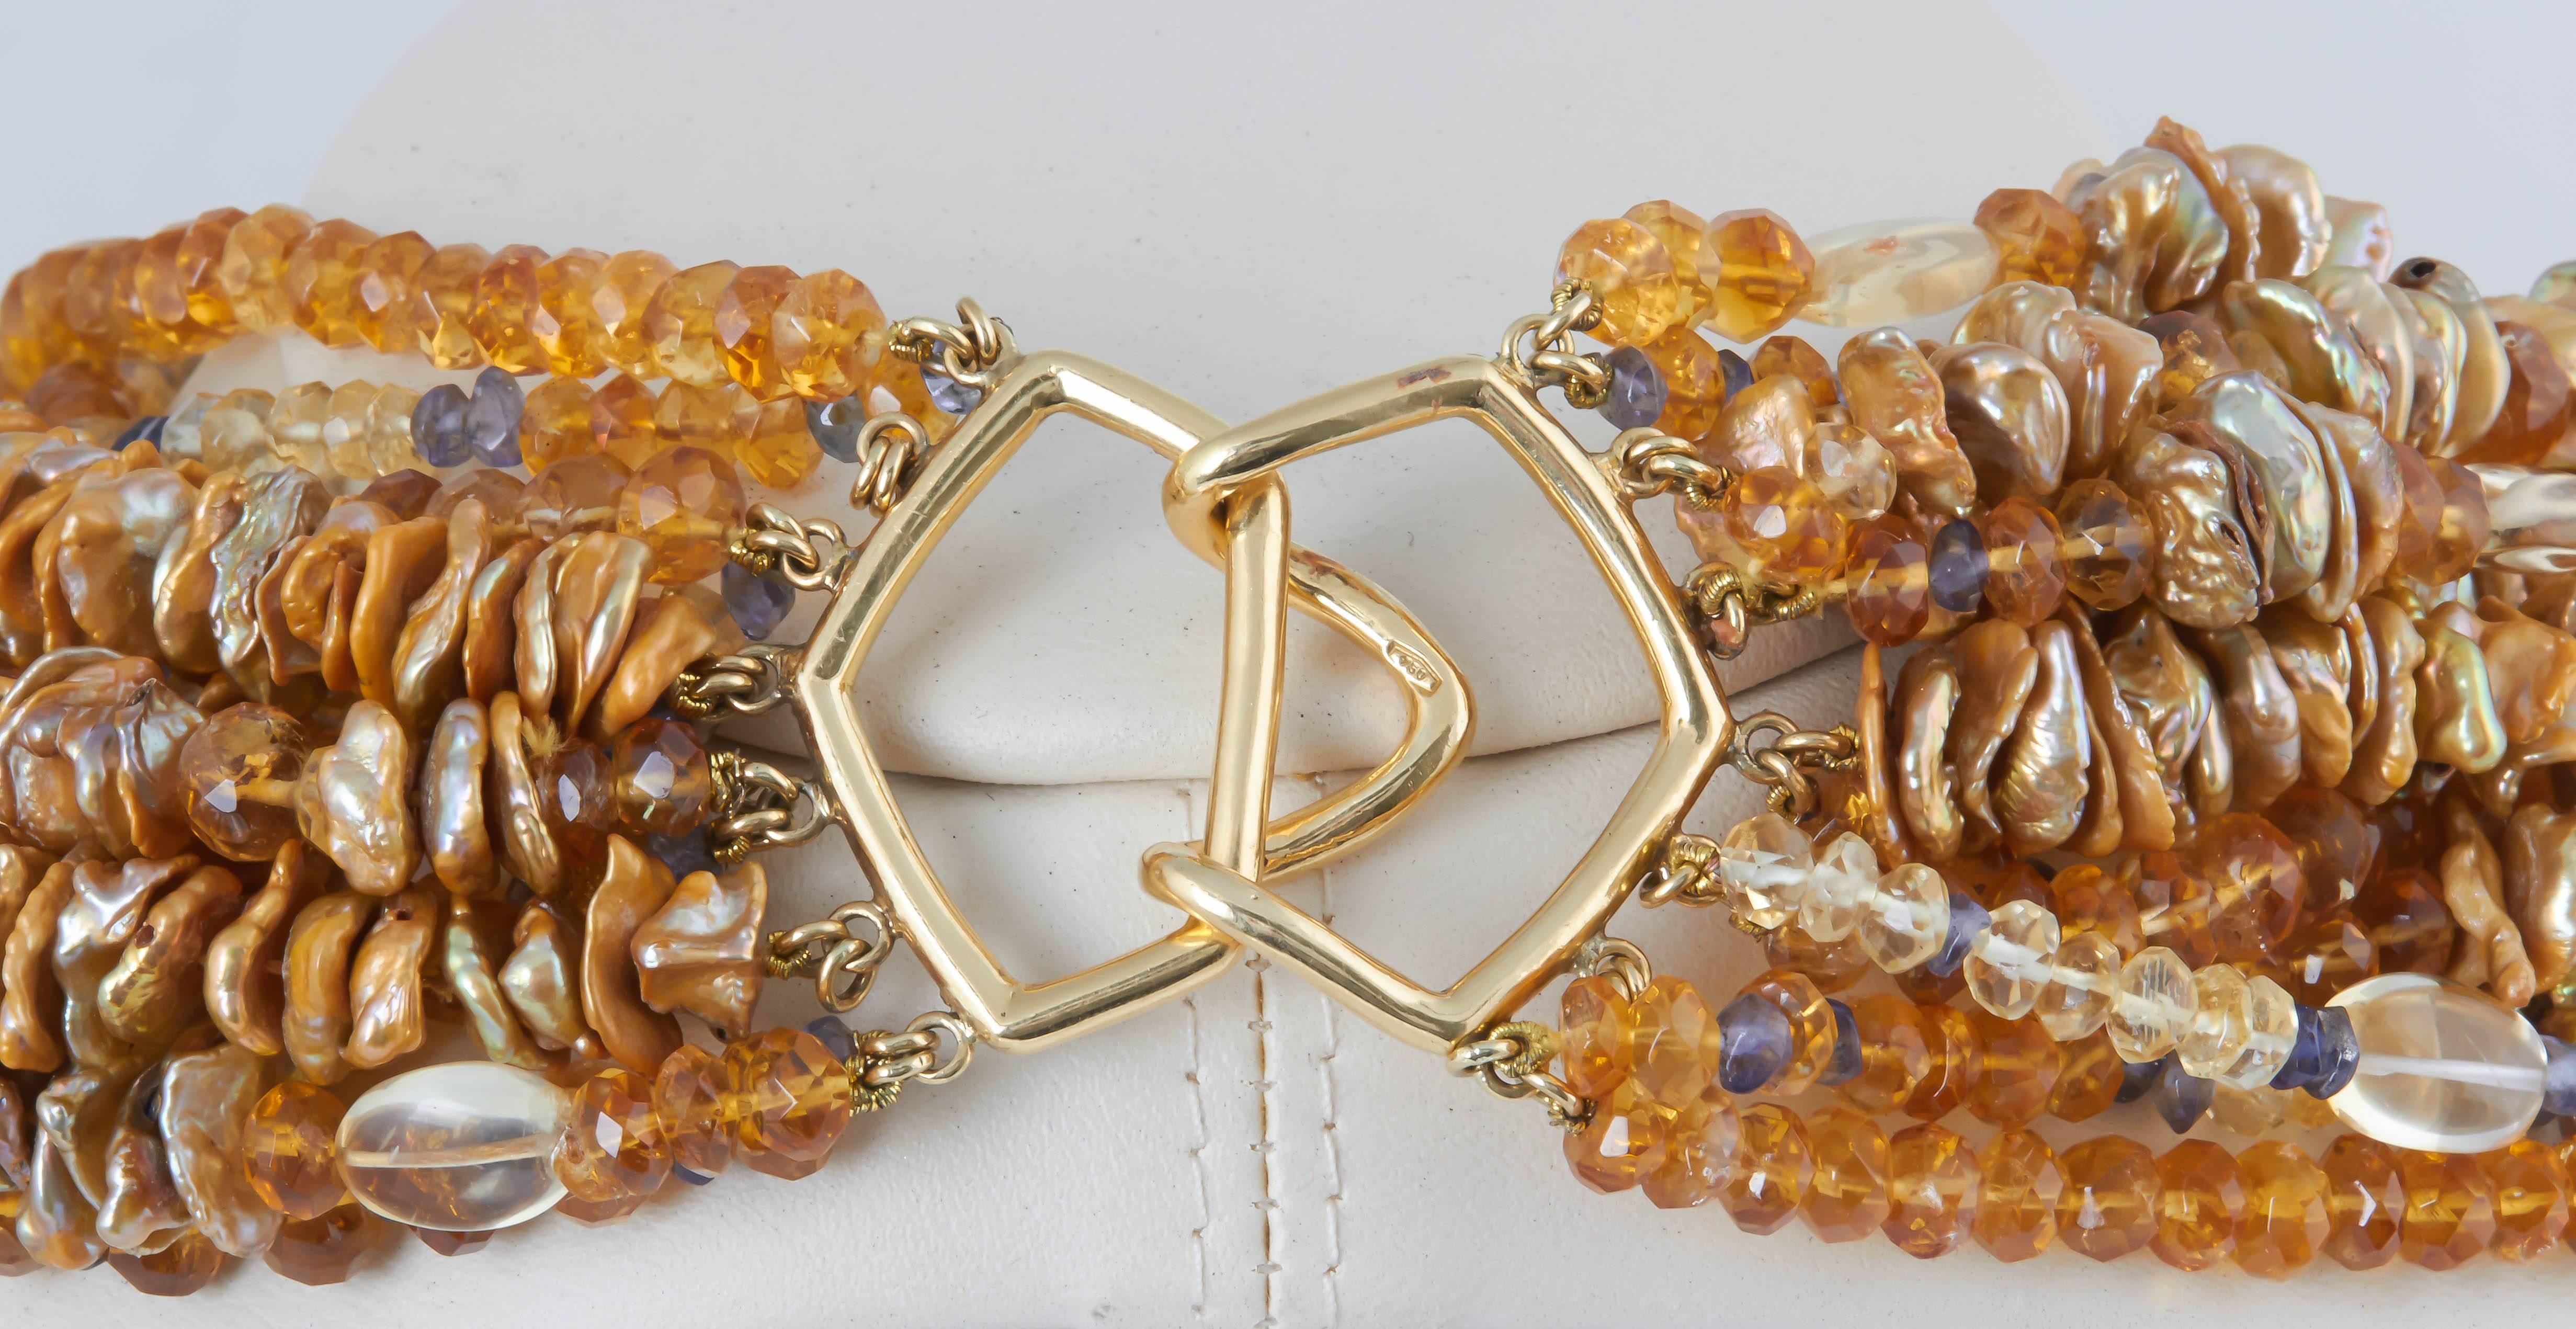 Twelve strands of golden color keshi pearls drilled through the center interspersed with strands of faceted citrine and sapphire beads. The necklace is finished with a large 18 kt clasp. The shortest stand is 18 in. and the longest about 22 in.